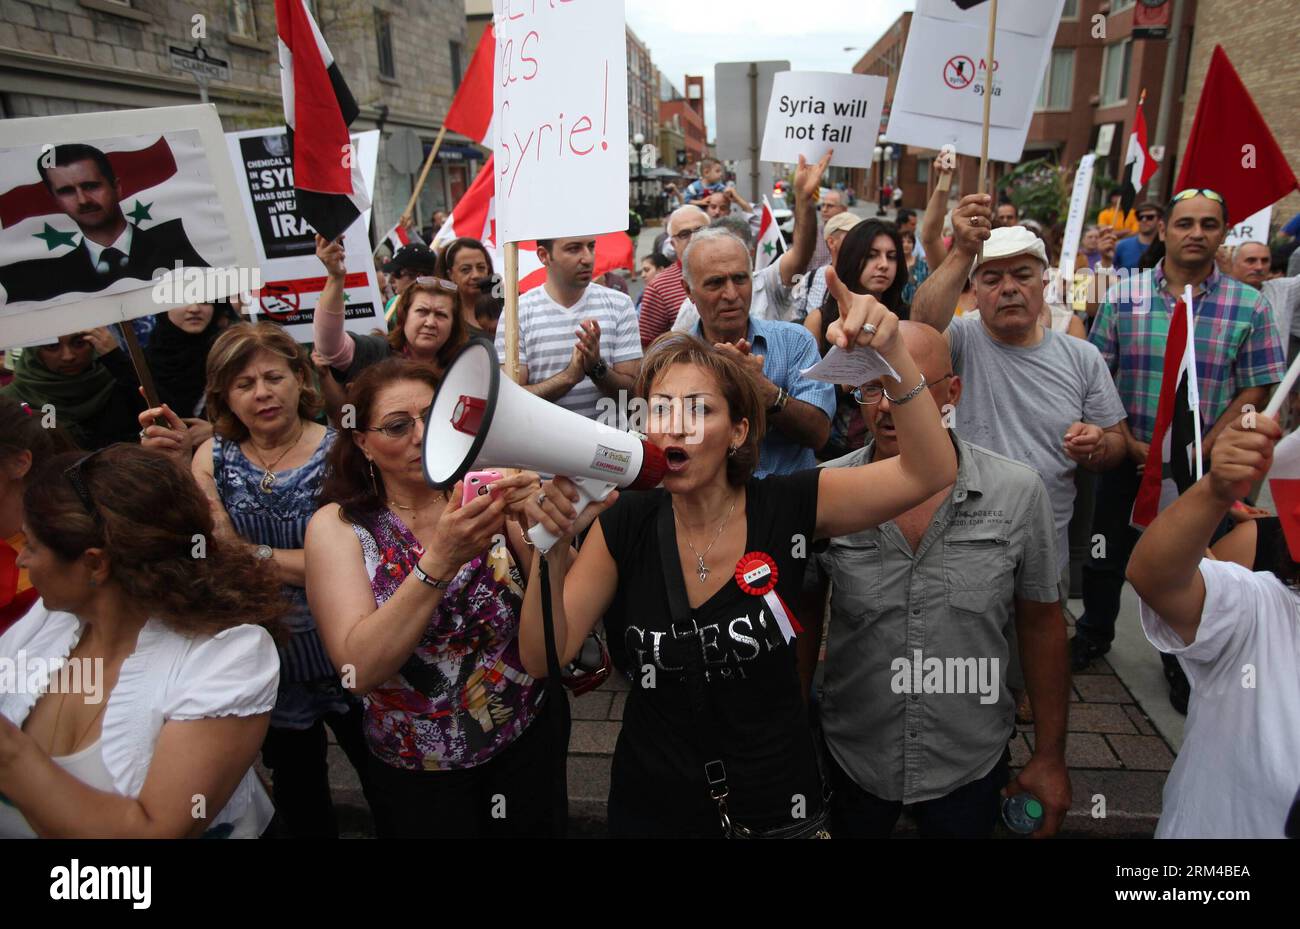 Bildnummer: 60418197  Datum: 31.08.2013  Copyright: imago/Xinhua Demonstrators march and chant in the streets outside the United States Embassy during a protest against the U.S. planned military strike in Syria on Aug. 31, 2013 in Ottawa, Canada. Canada s Prime Minister Stephen Harper said Thursday that Canada has no plans for a military mission of its own in Syria, although the government supports its allies and has been convinced of the need for forceful action. (Xinhua/Cole Burston) CANADA-OTTAWA-SYRIA-U.S.-PROTEST PUBLICATIONxNOTxINxCHN Politik Demo premiumd x0x xsk 2013 quer     60418197 Stock Photo